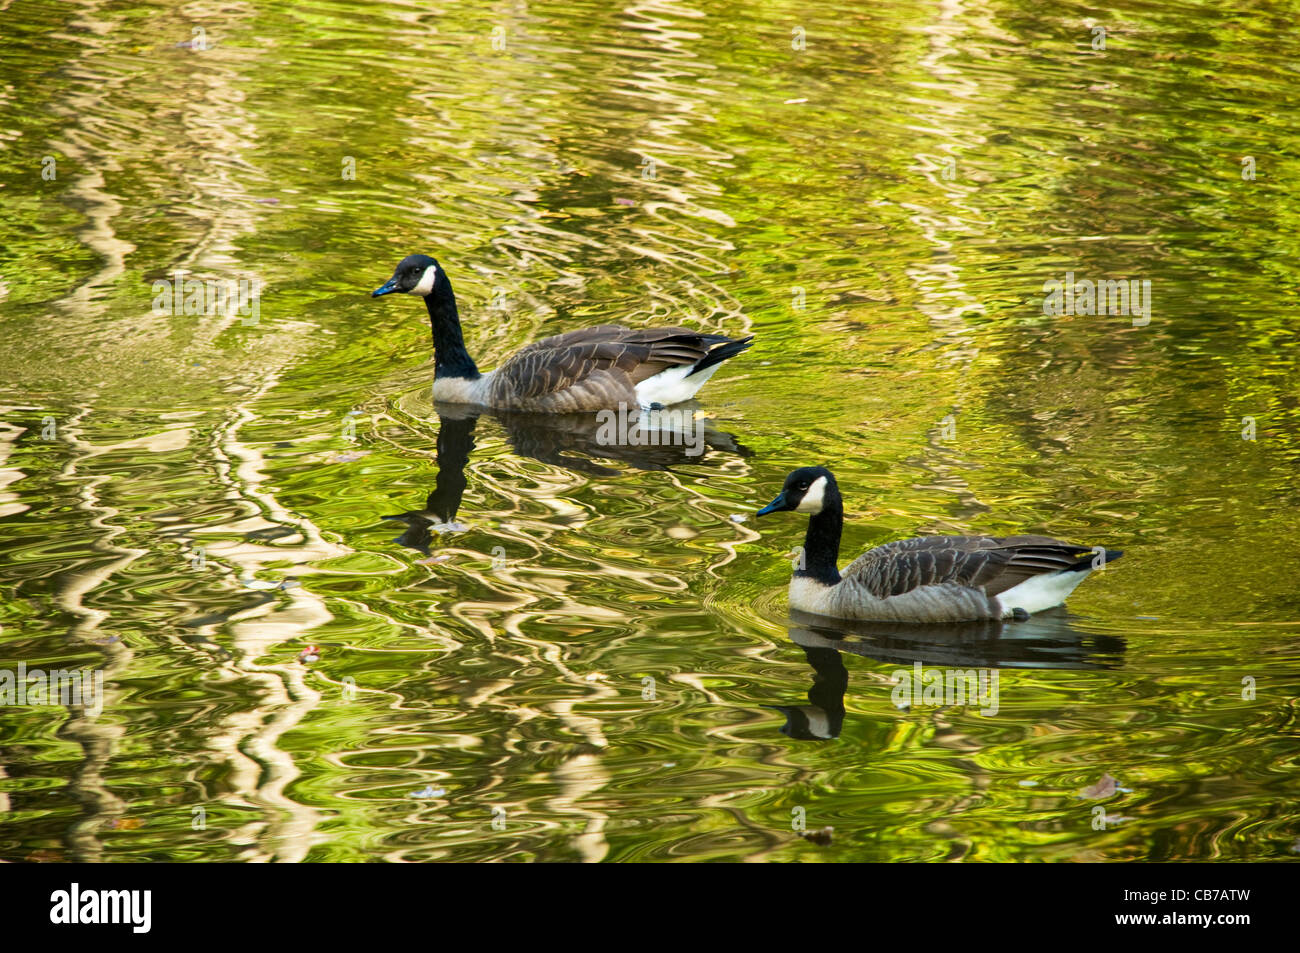 Two geese or mallards swimming in an autumn stream with rippled reflections in the water Stock Photo